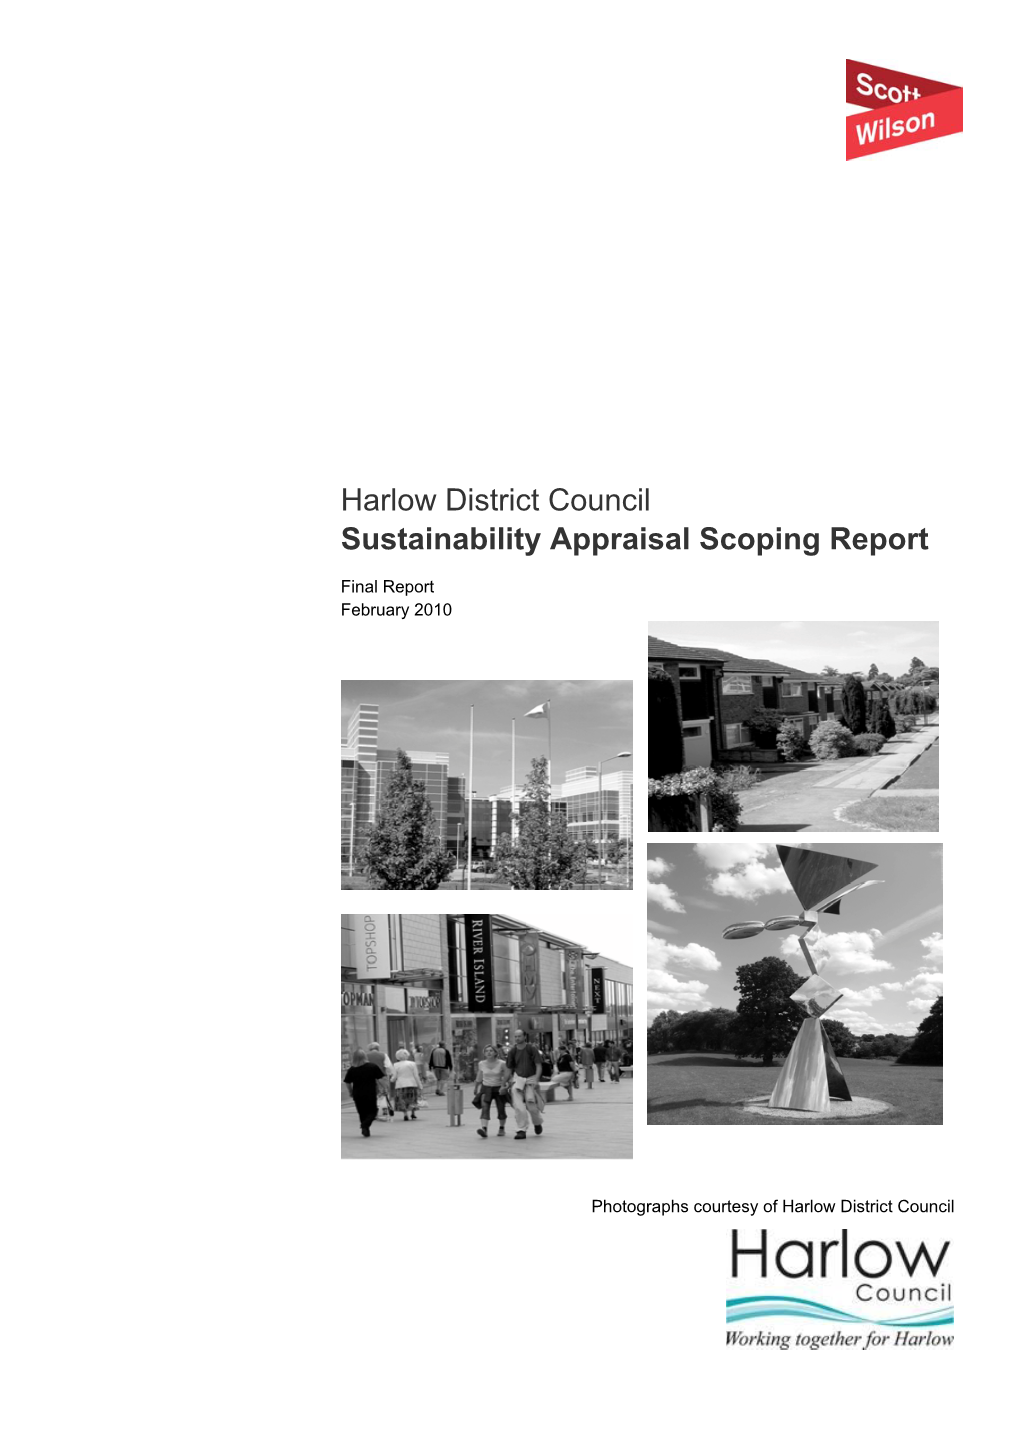 Harlow District Council Sustainability Appraisal Scoping Report